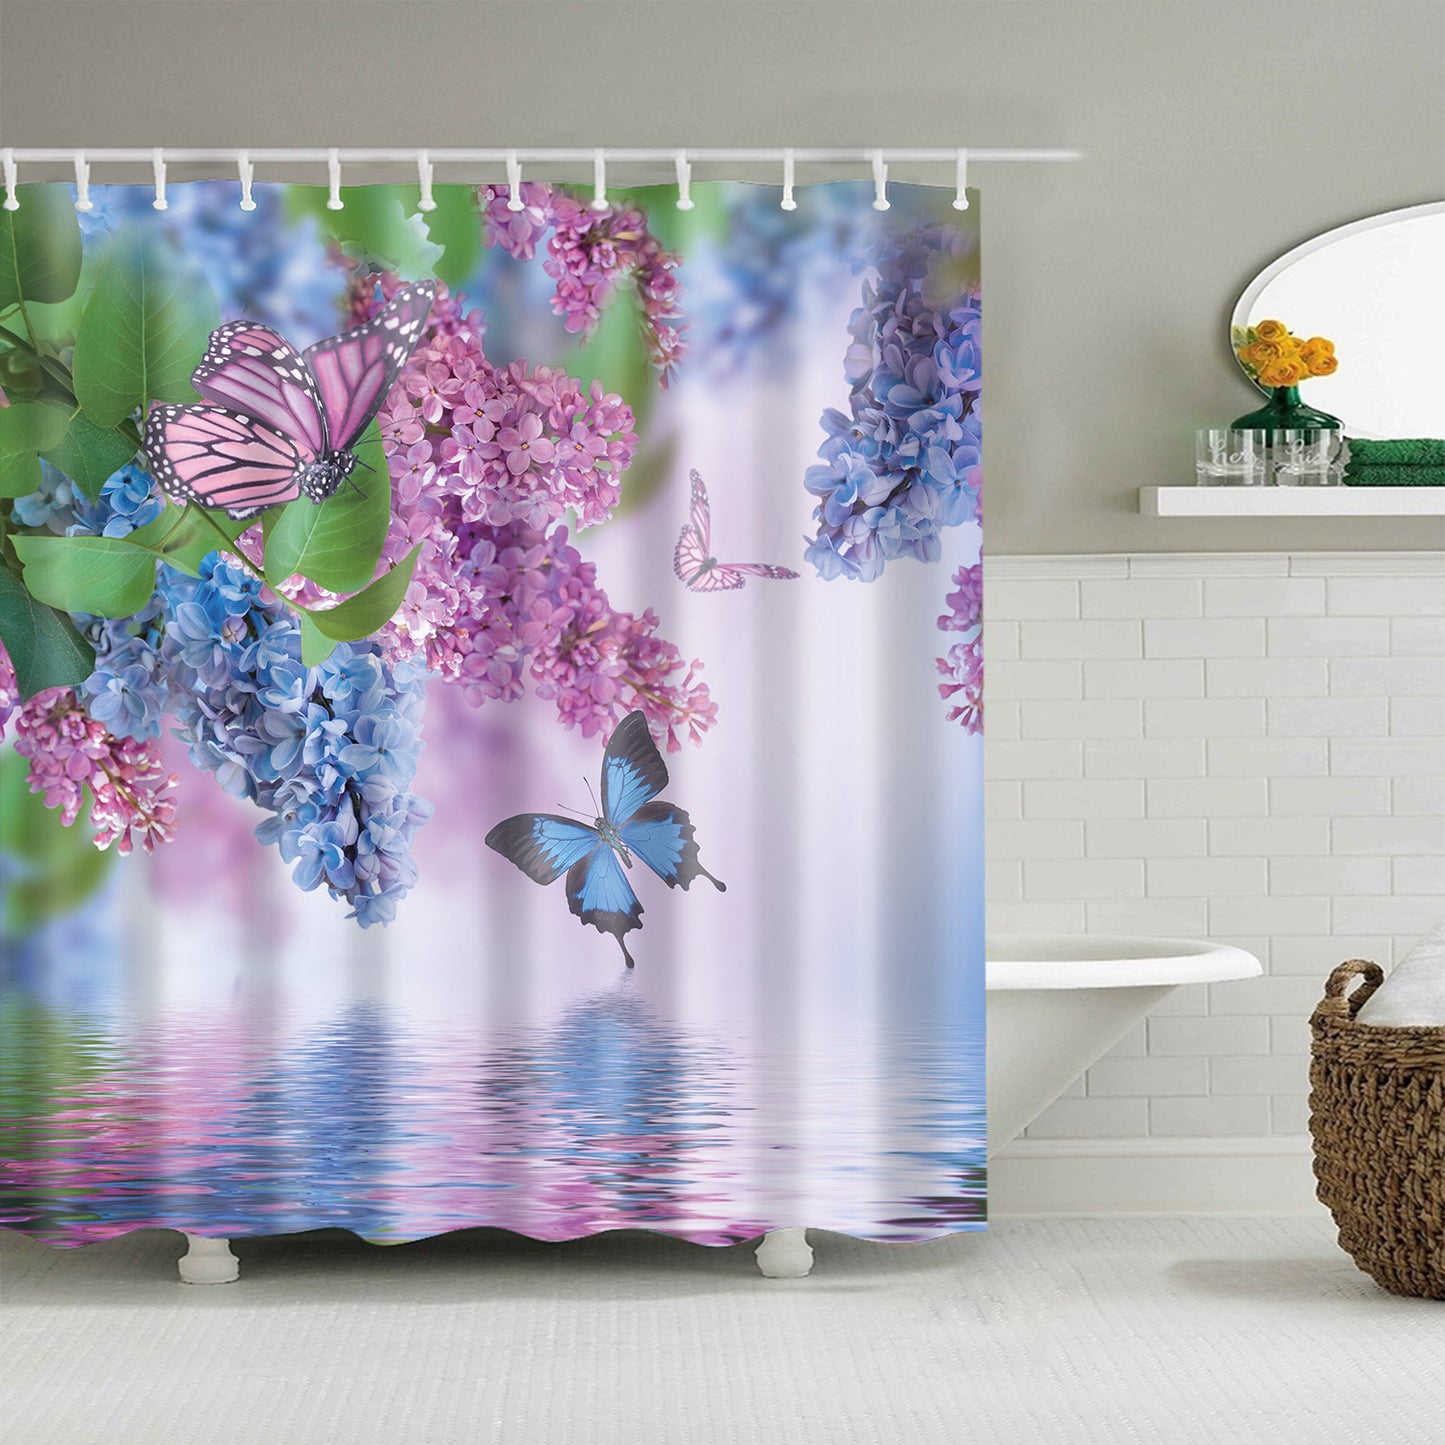 Blue and Pink Violet Floral Butterfly River Shower Curtain